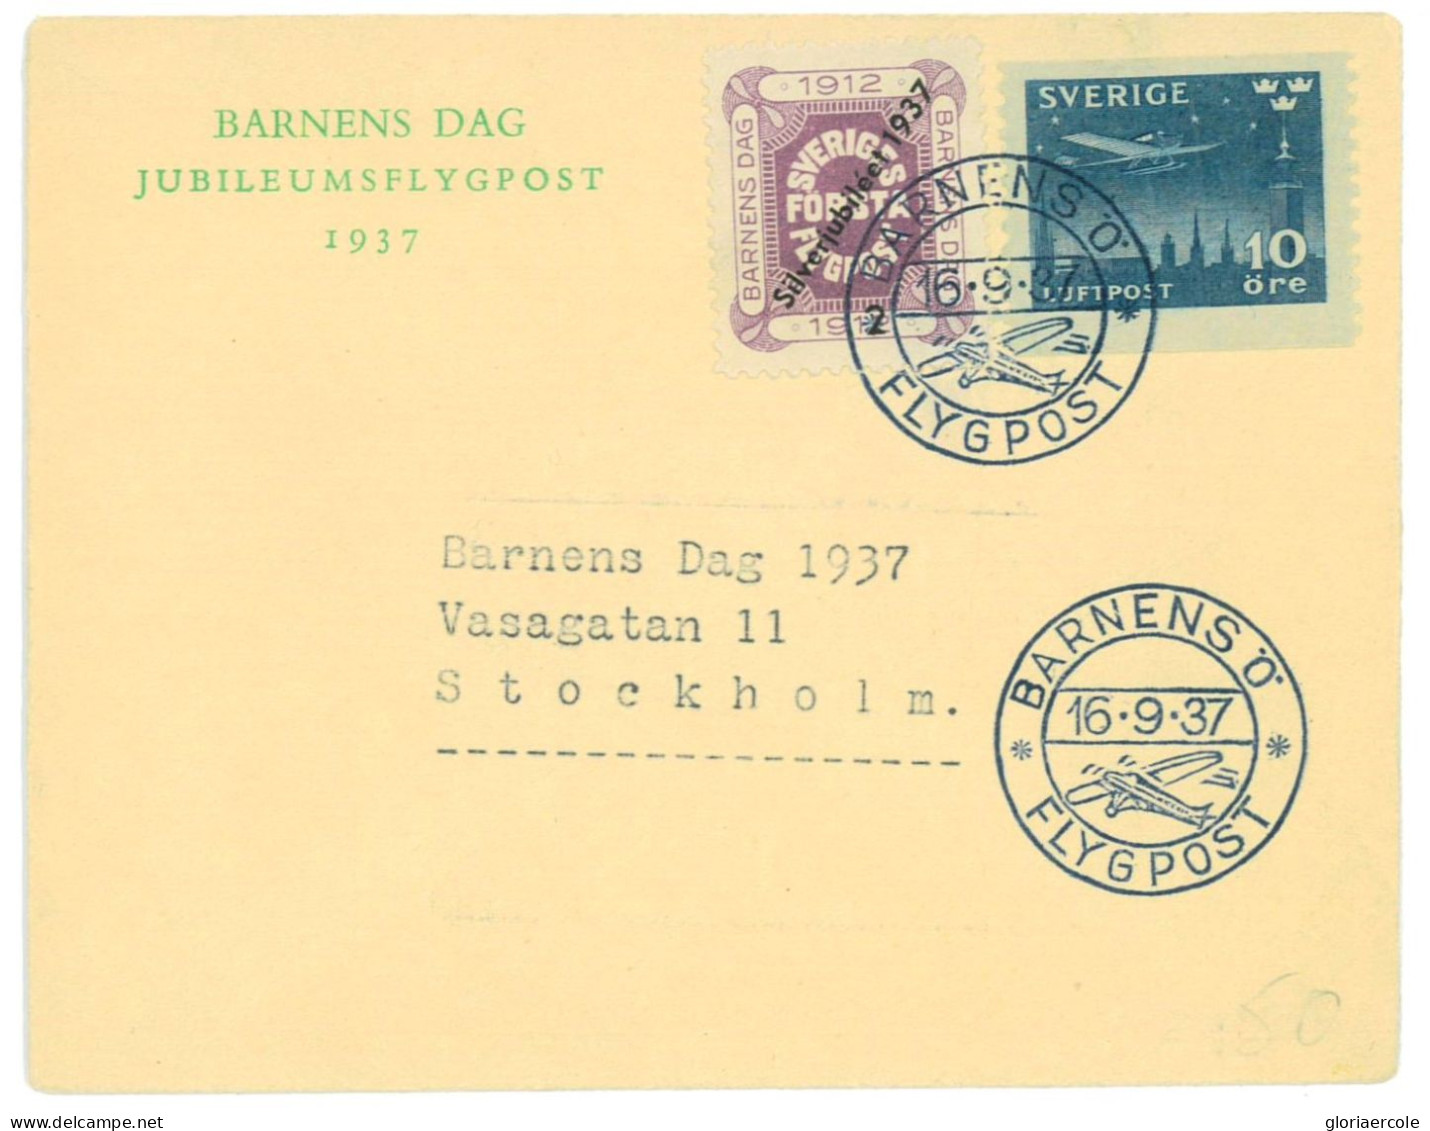 P2927 - SWEDEN, SPECIAL FLIGHT 1937 MÜLLER 152 WITH SPECIAL LEFLET INSIDE AND BARNENS DAG LABEL ON THE FRONT. - Avions